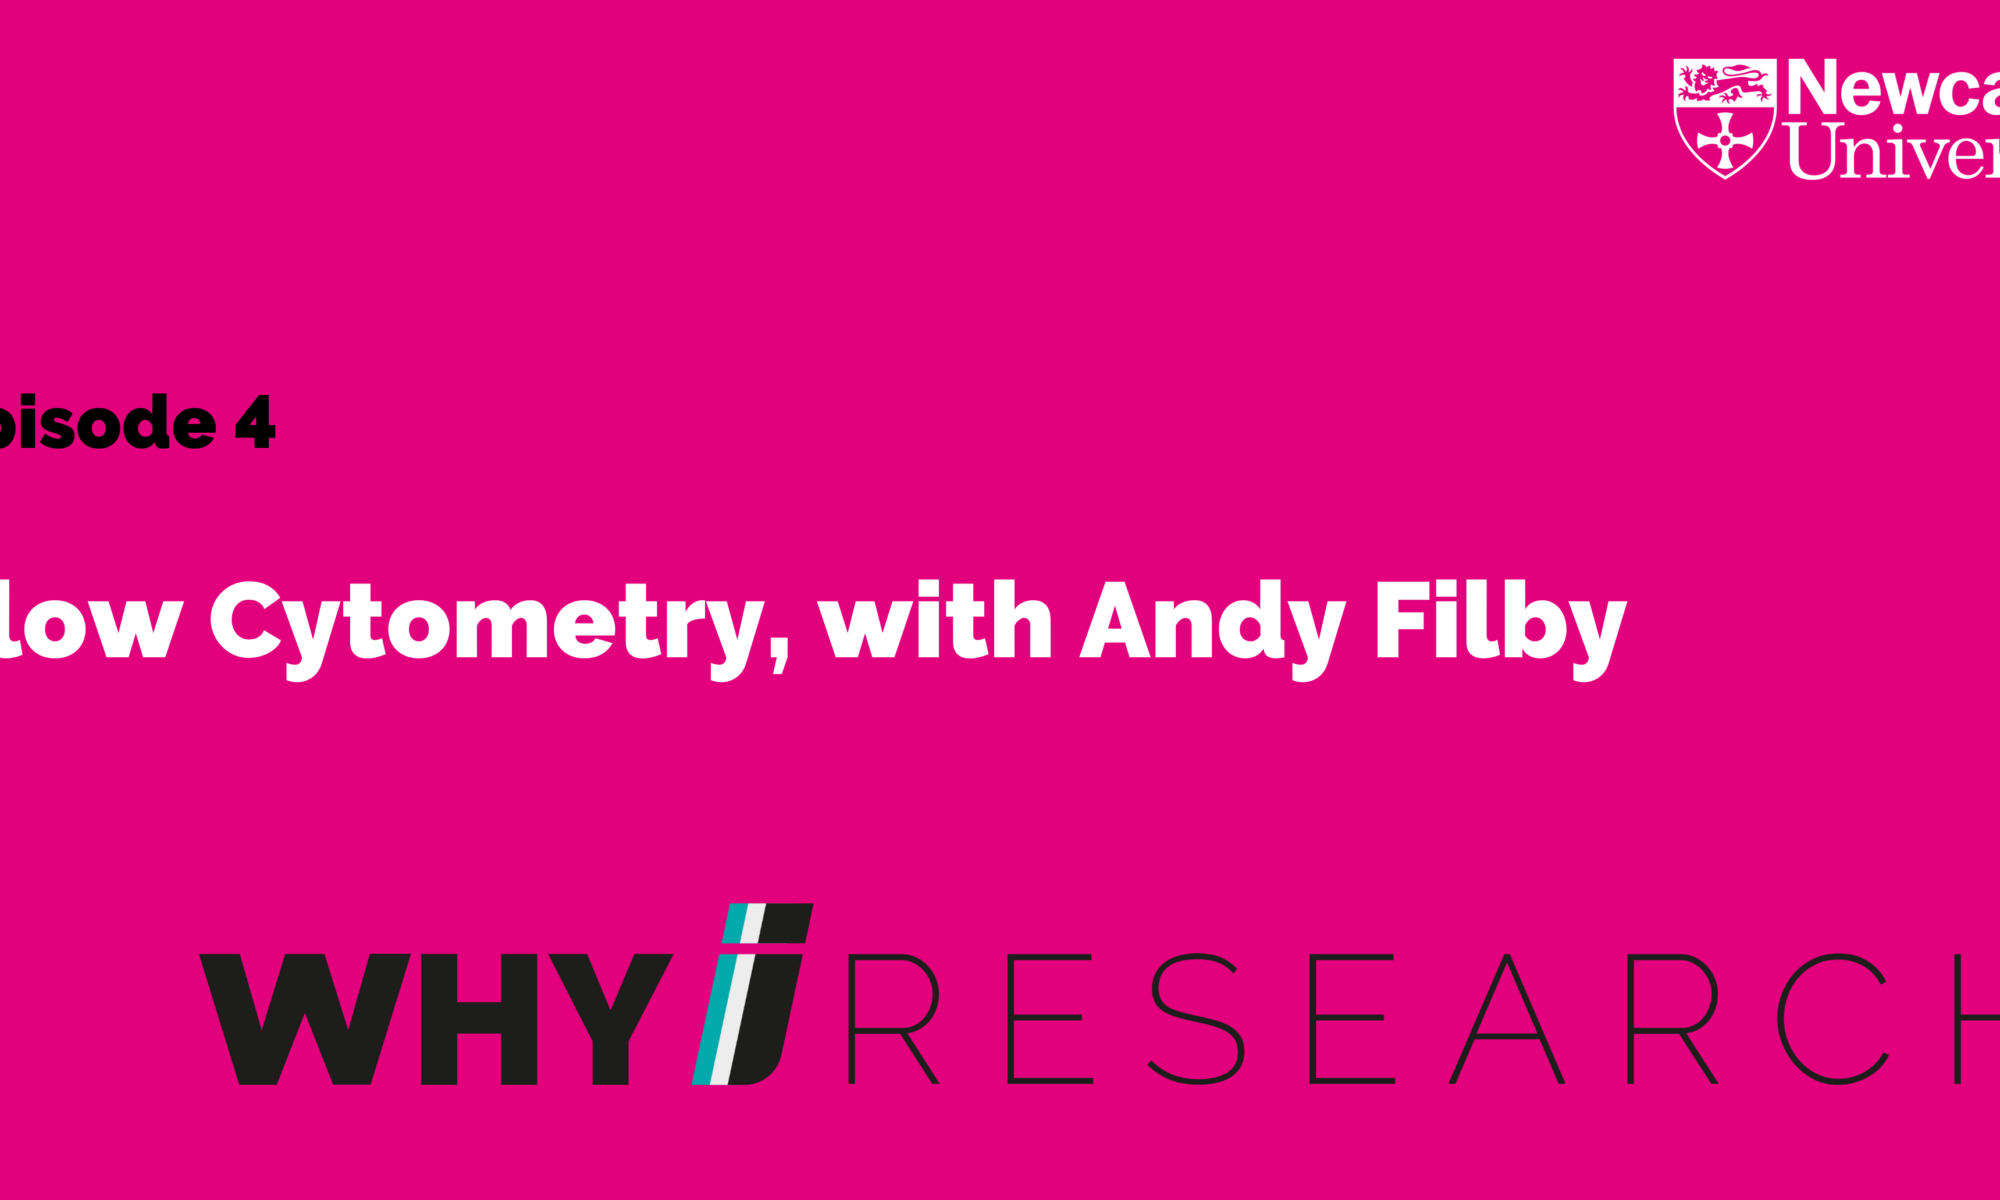 Cytometry with Andy Filby